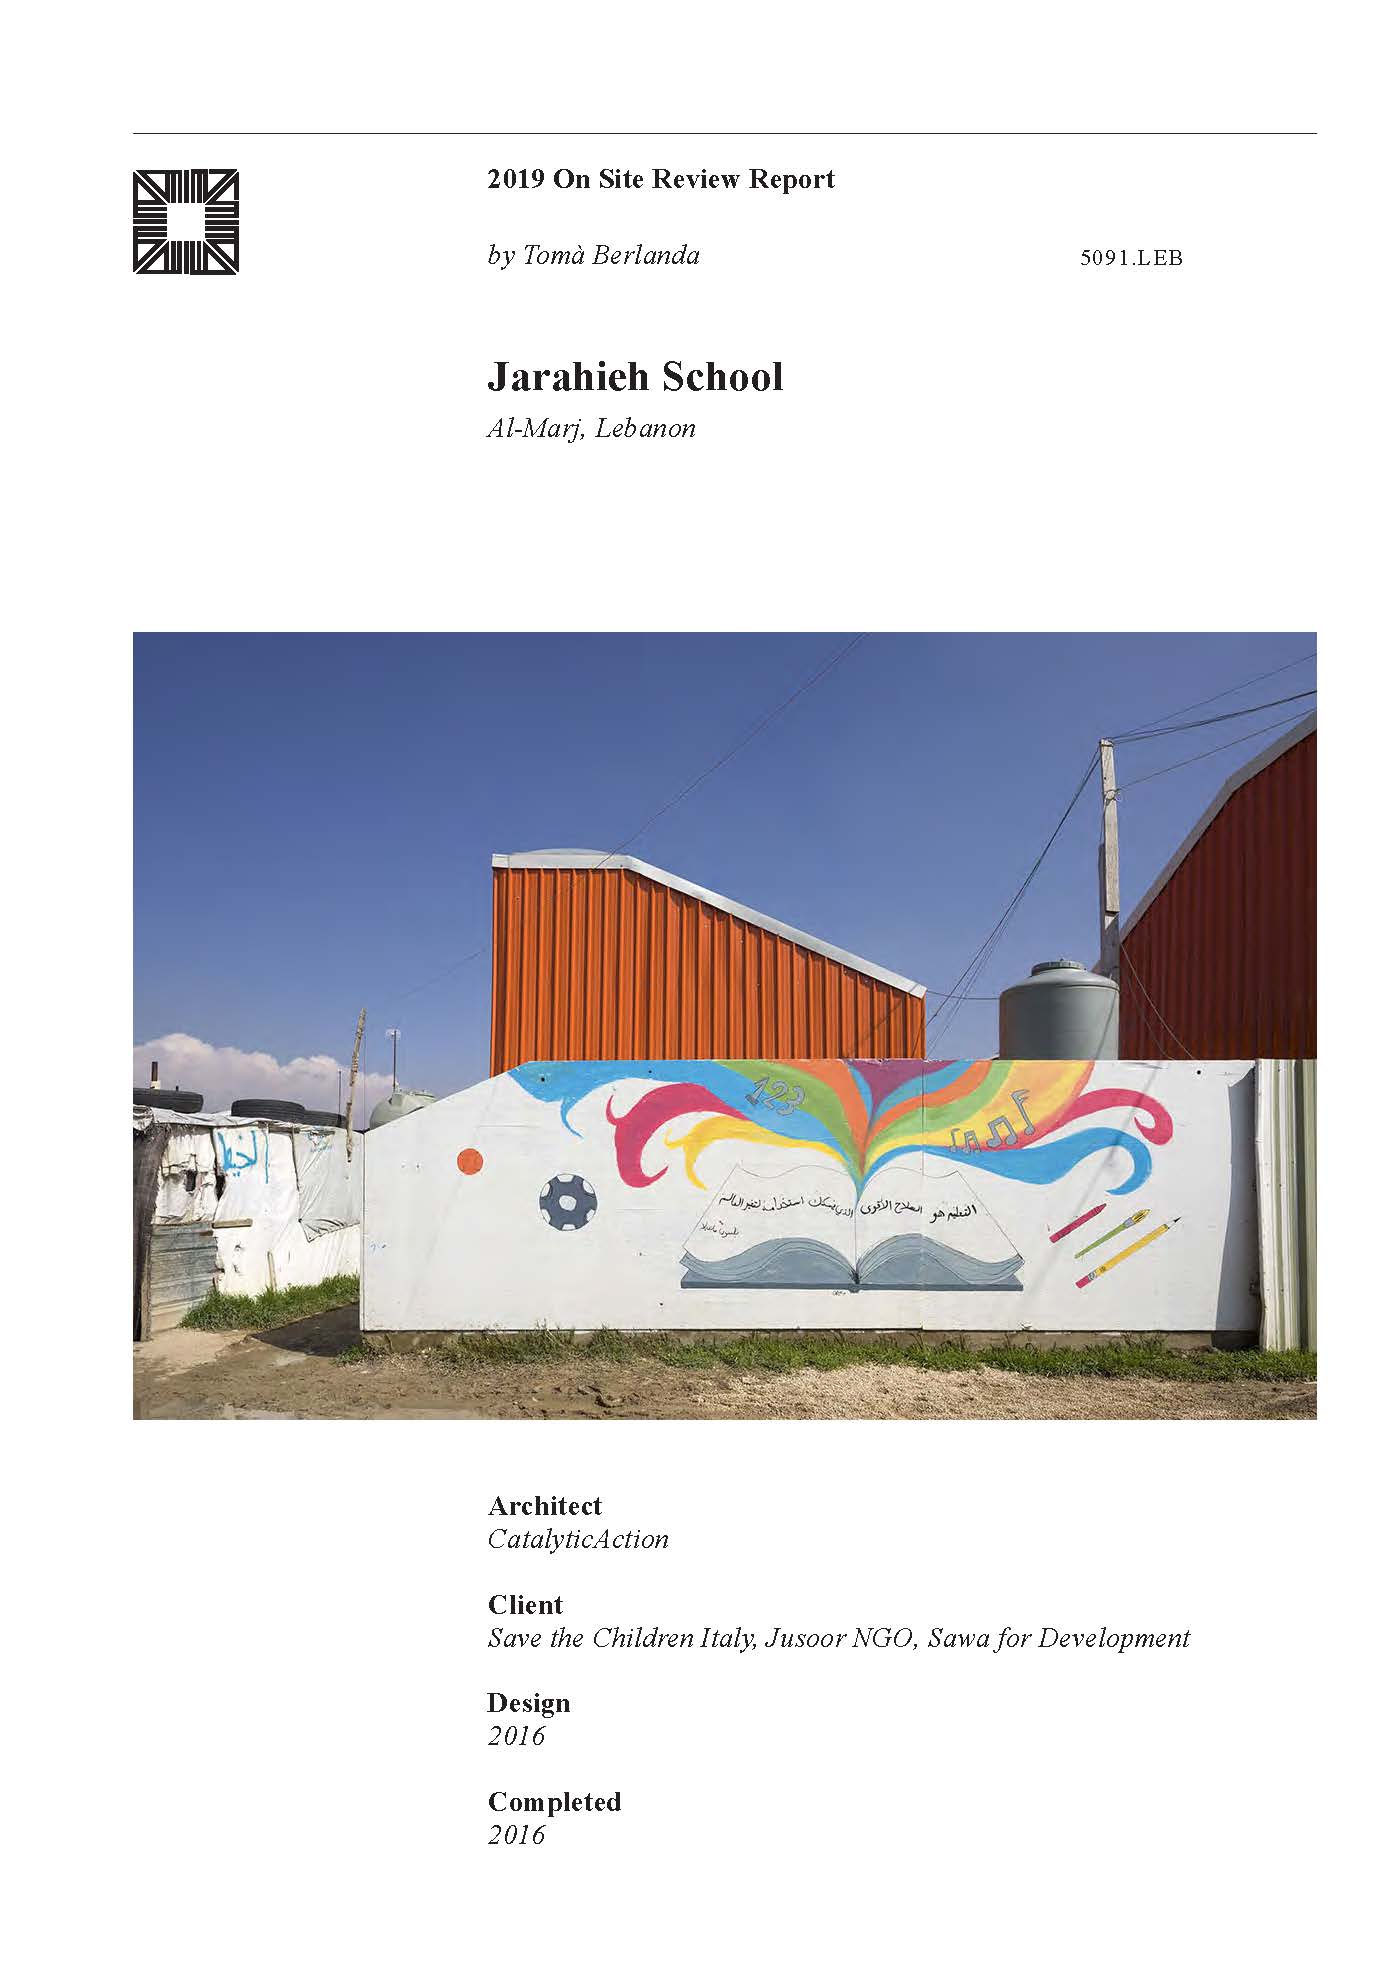 Jarahieh School On-site Review Report